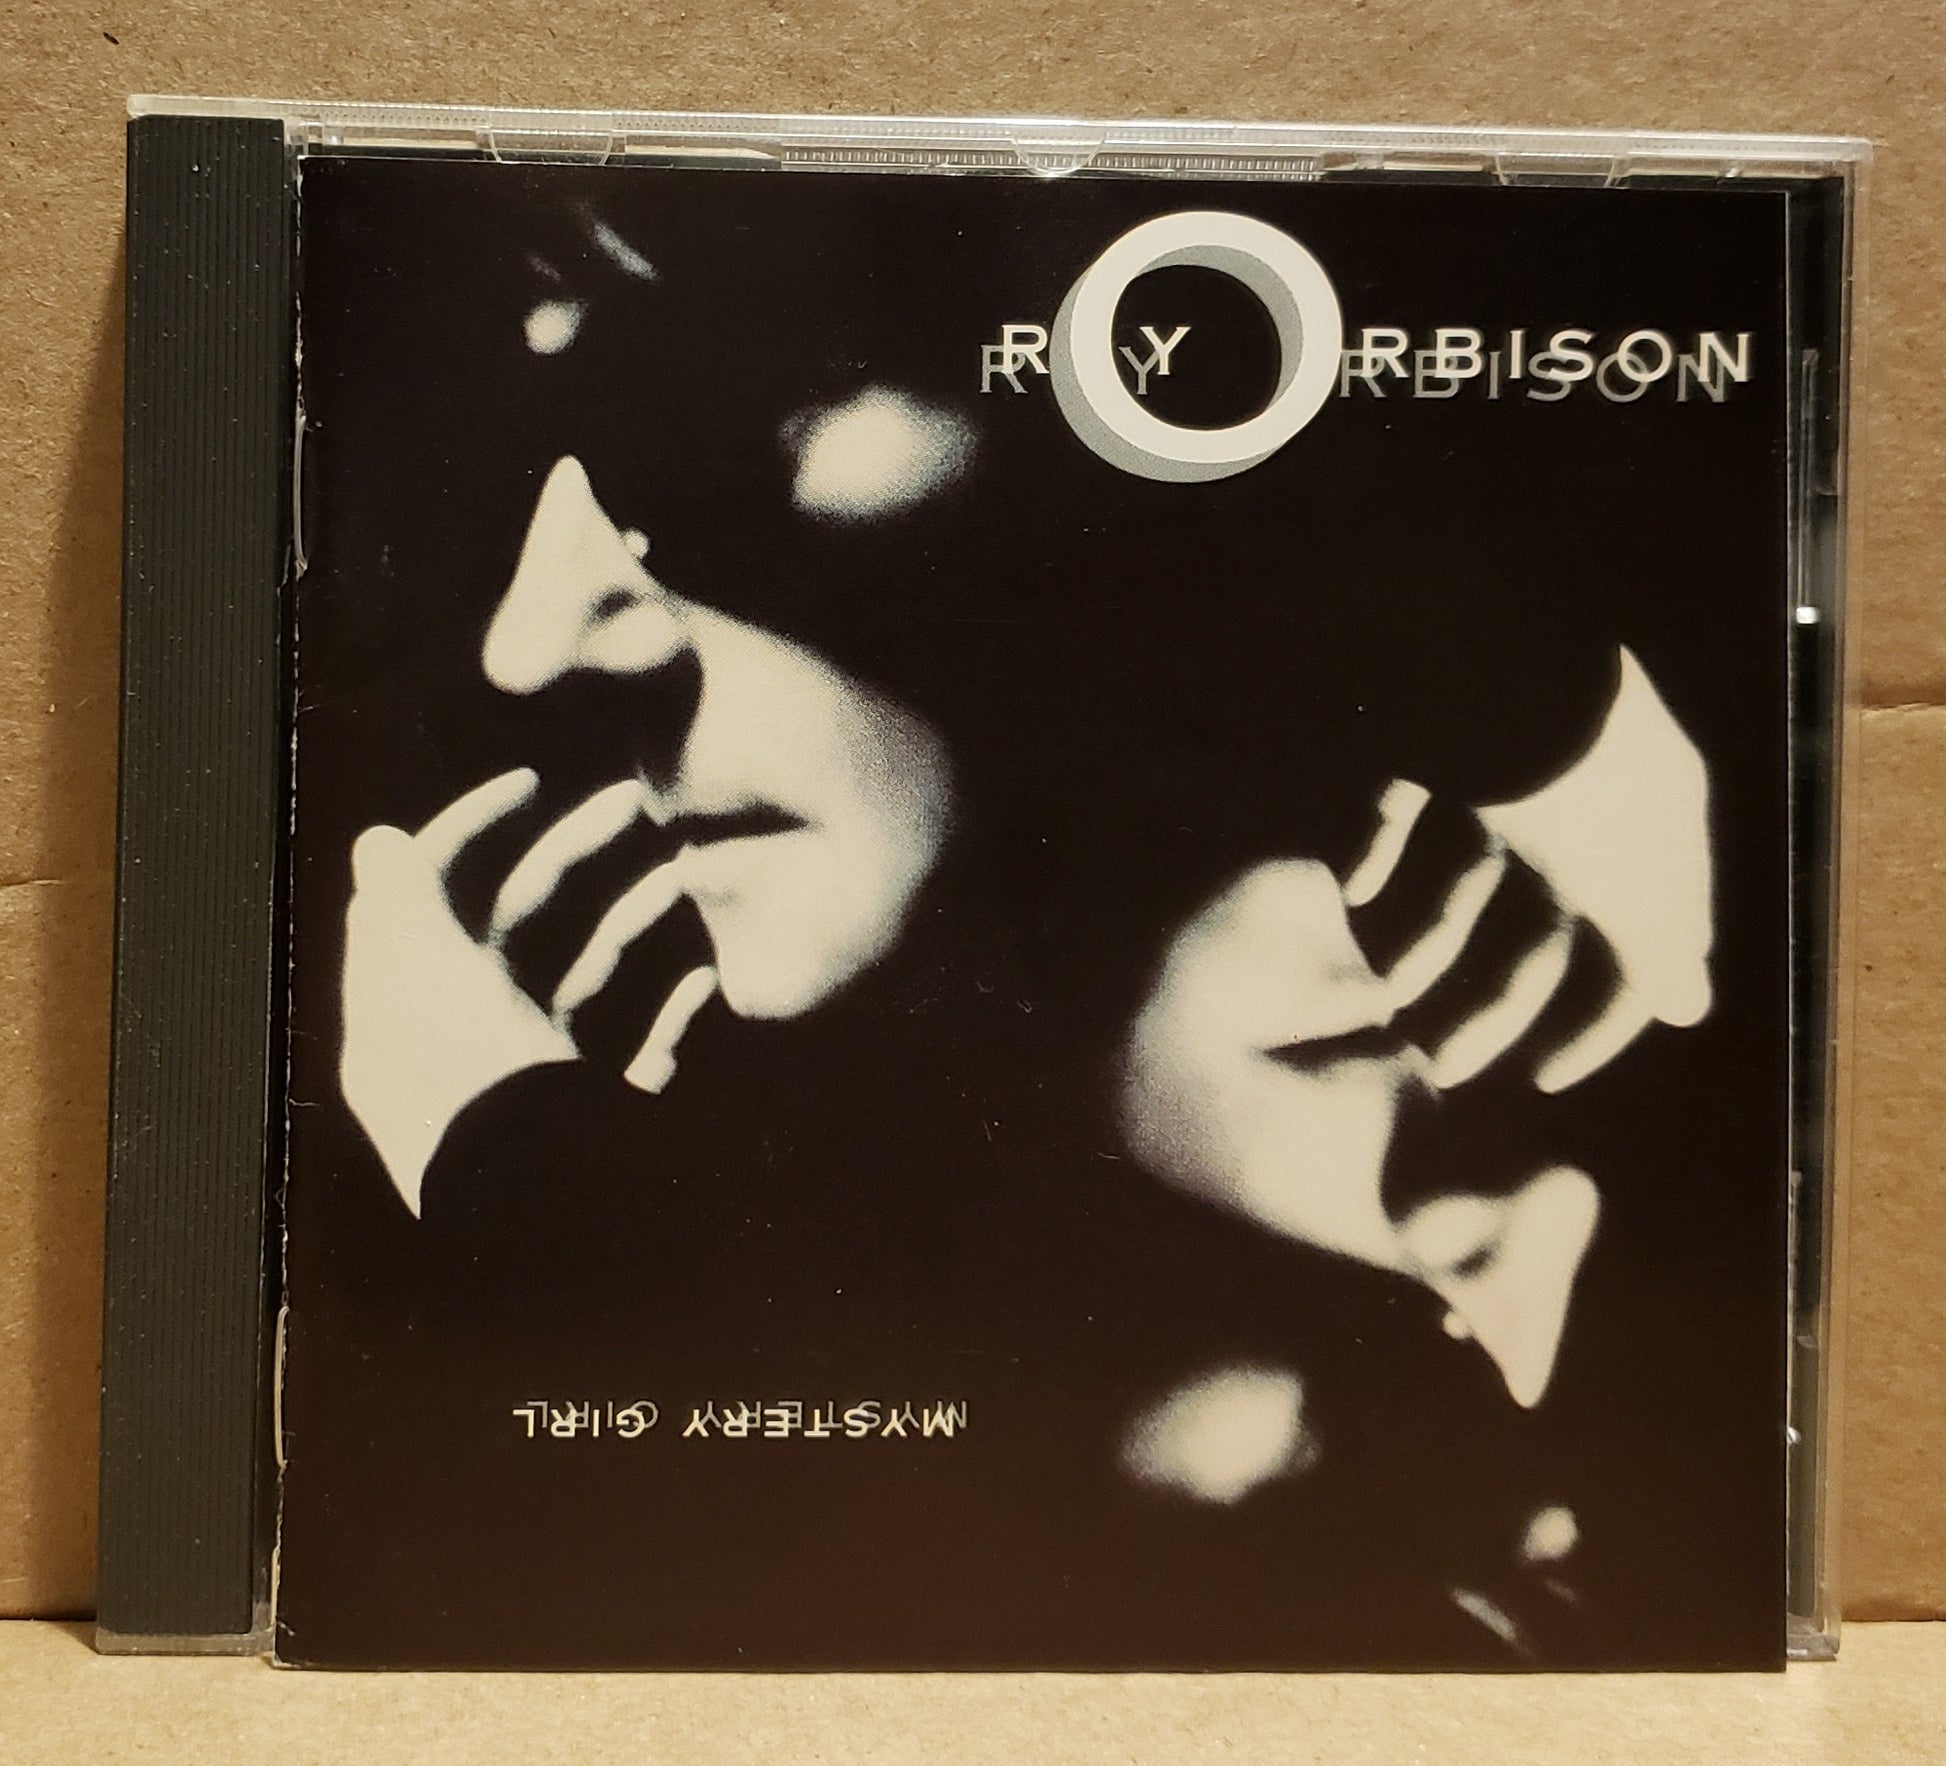 Roy Orbison - Mystery Girl [1989 Club Edition] [Used CD]